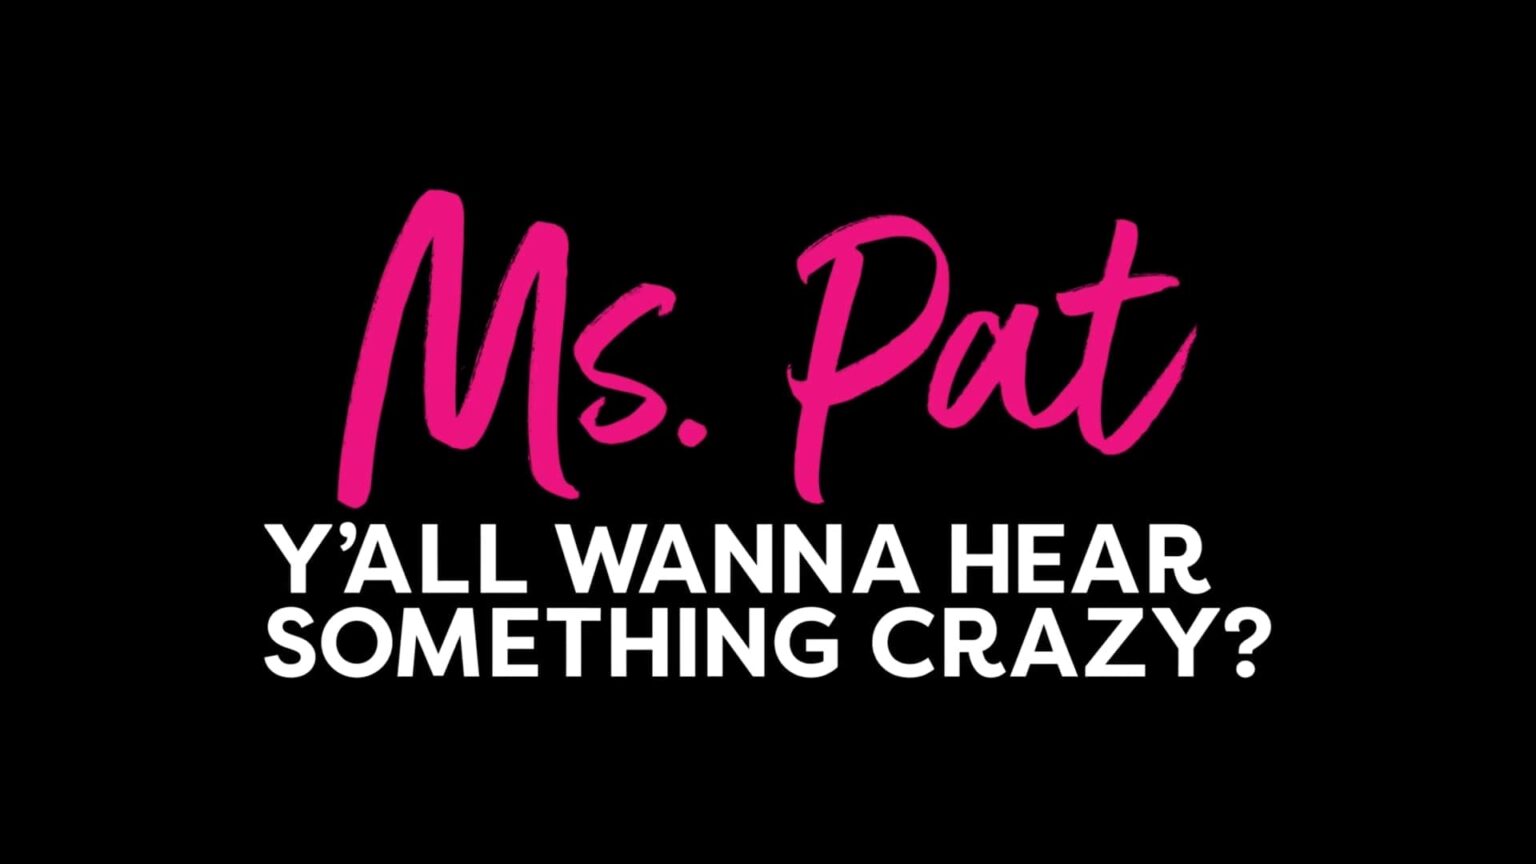 🎬 Ms Pat Y All Wanna Hear Something Crazy [netflix Trailer] Release Date February 8 2022